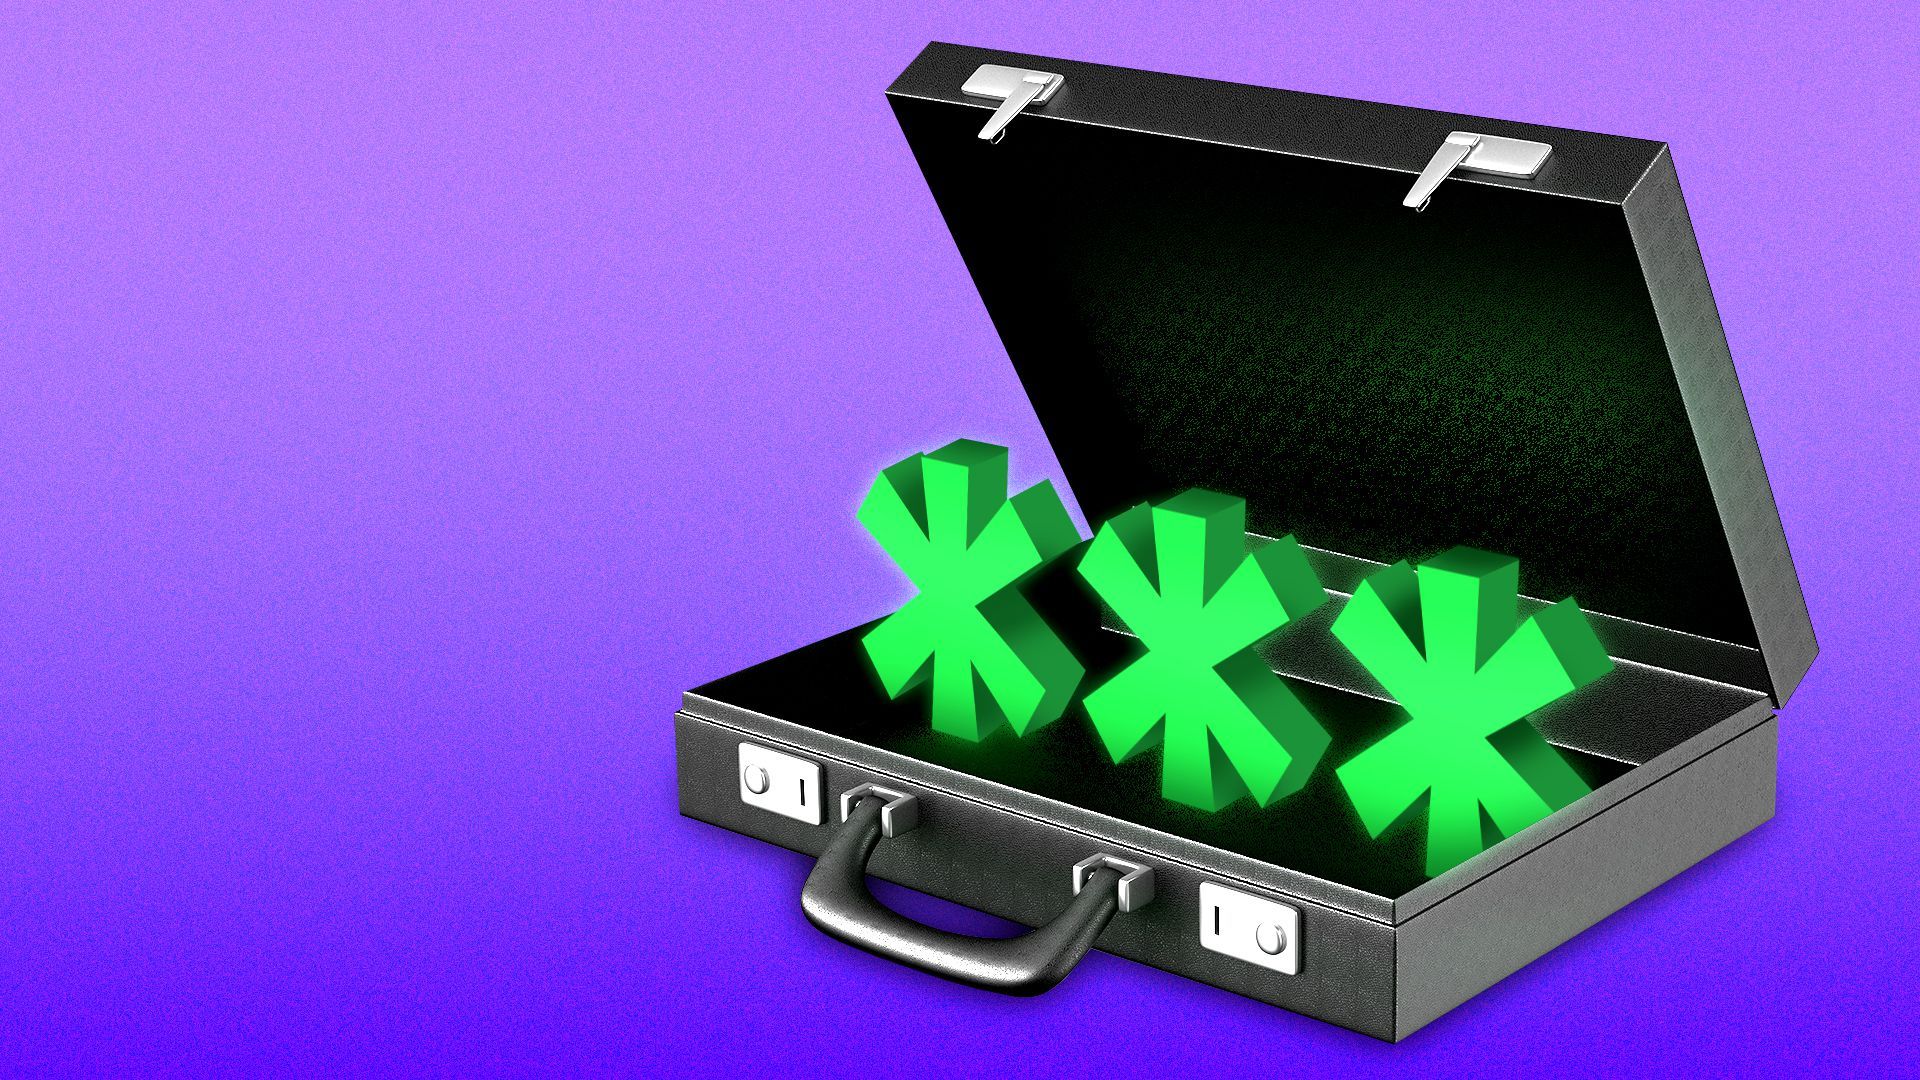 Illustration of an opened briefcase revealing glowing asterisks inside